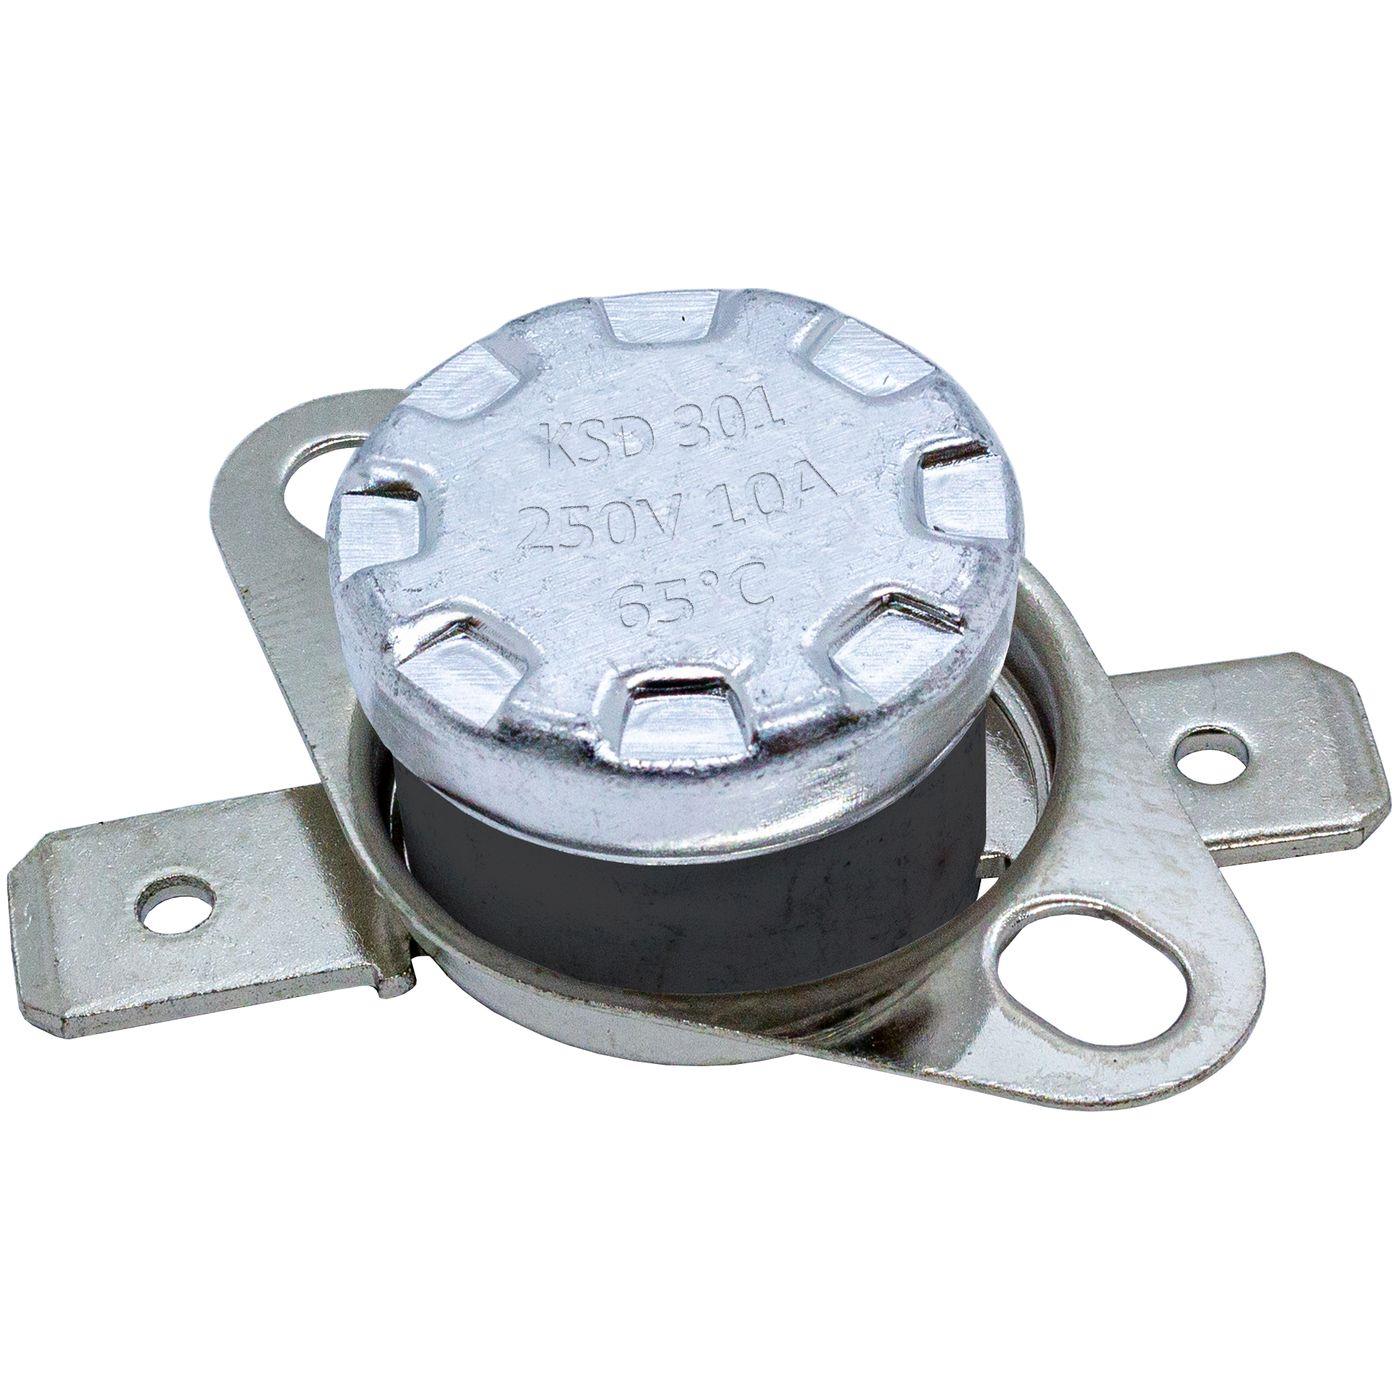 Thermal switch 65°C NO contact 250V 10A Temperature switch thermostat KSD301 Bimetal Thermal protection